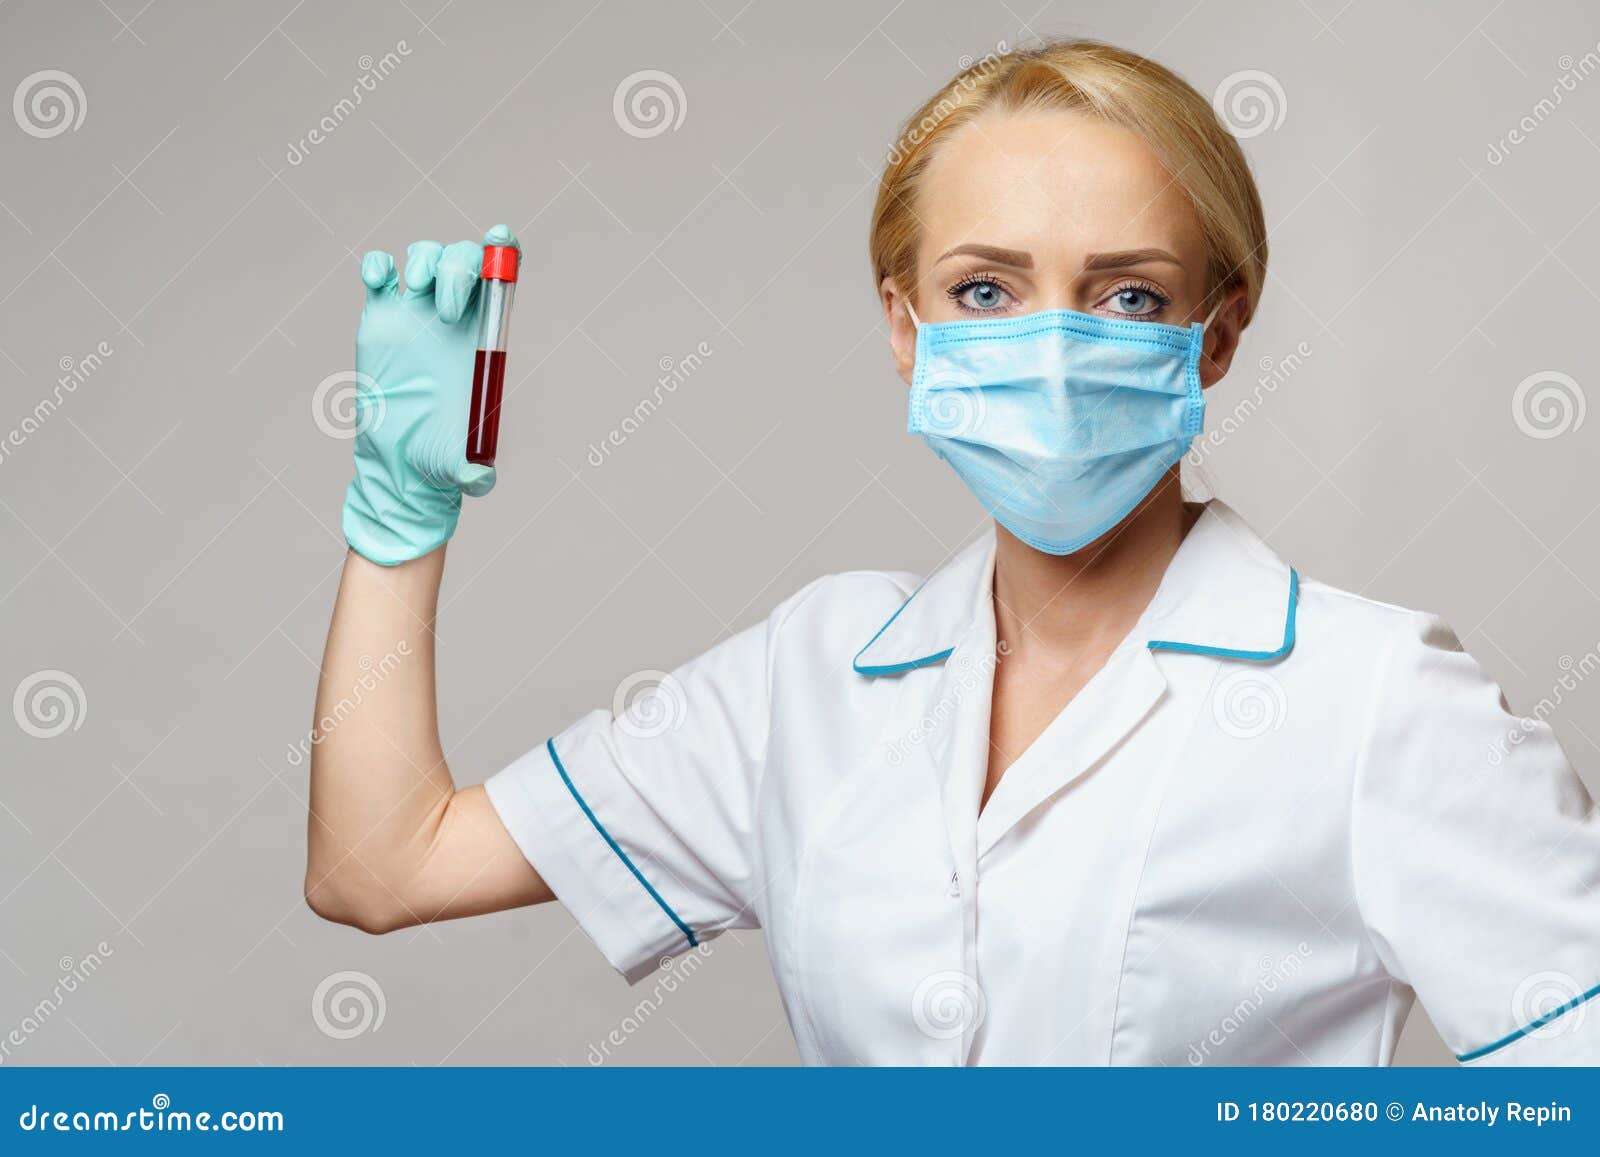 Medical Doctor Nurse Woman Wearing Protective Mask and Gloves - Holding ...